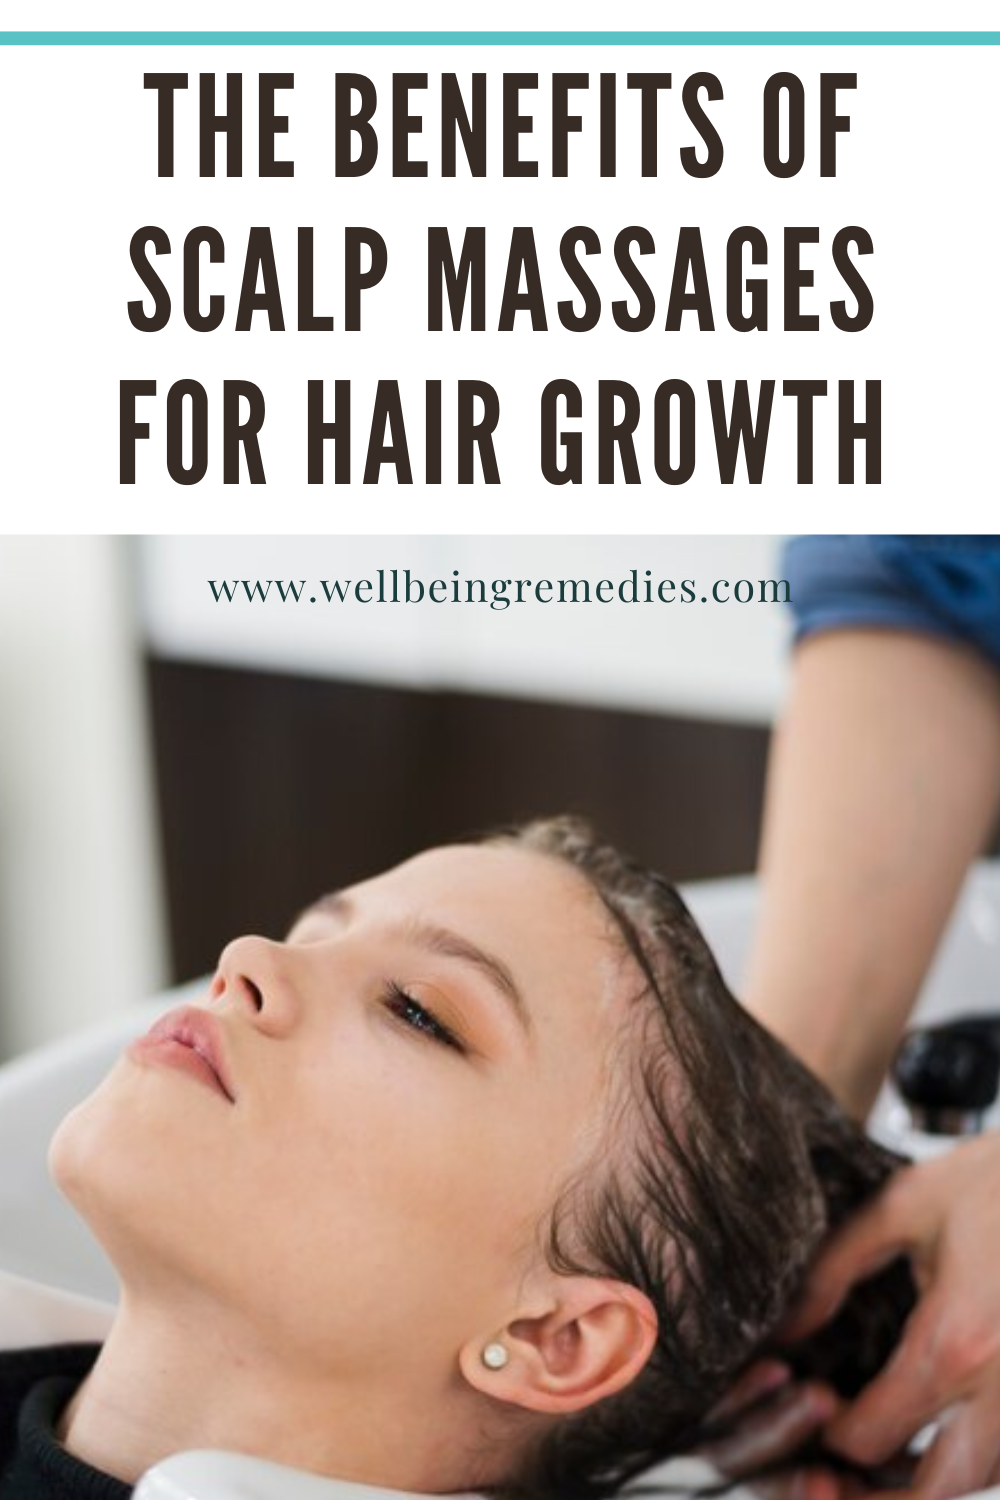 The Benefits of Scalp Massages for Hair Growth